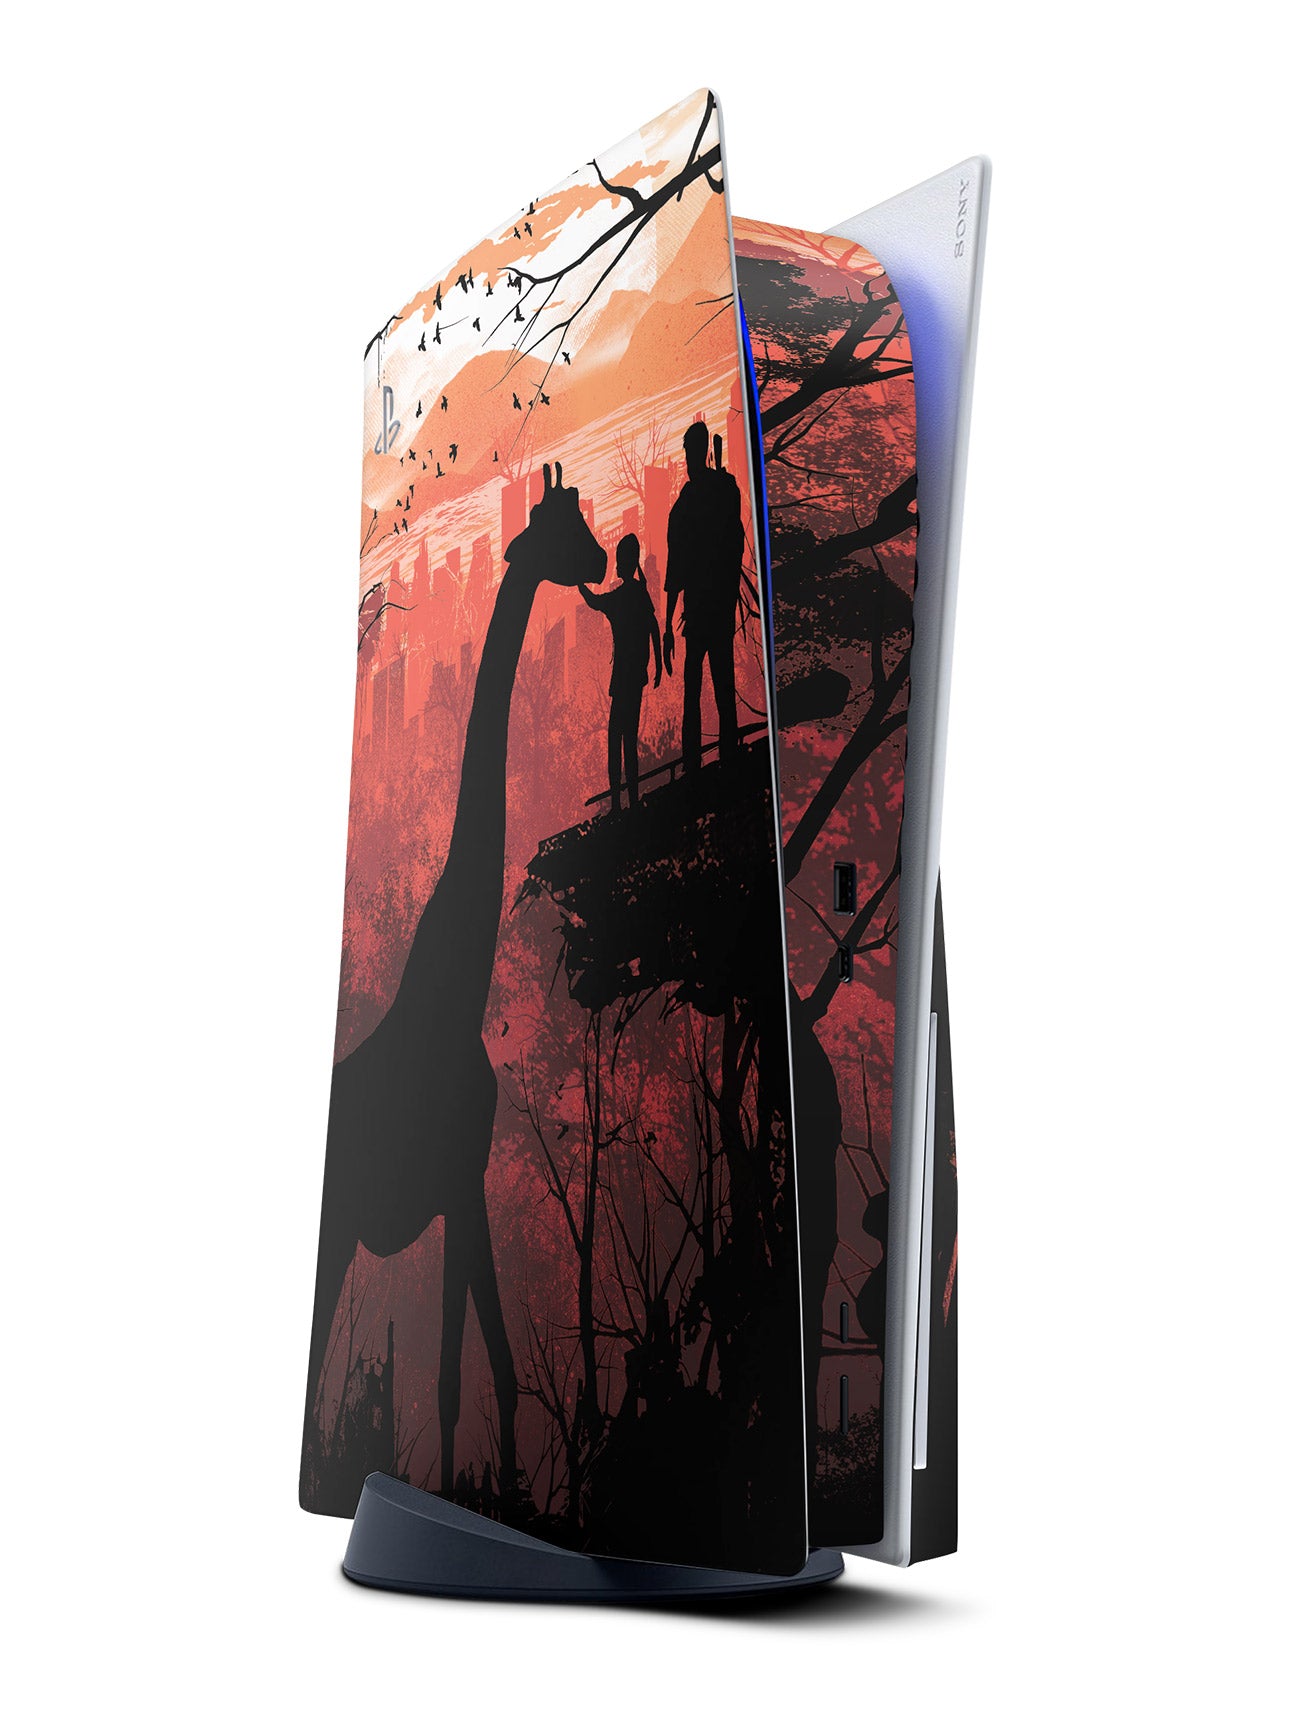 Ellie and Joel - The Last of Us PS5 Vinyl Console Skin Sticker